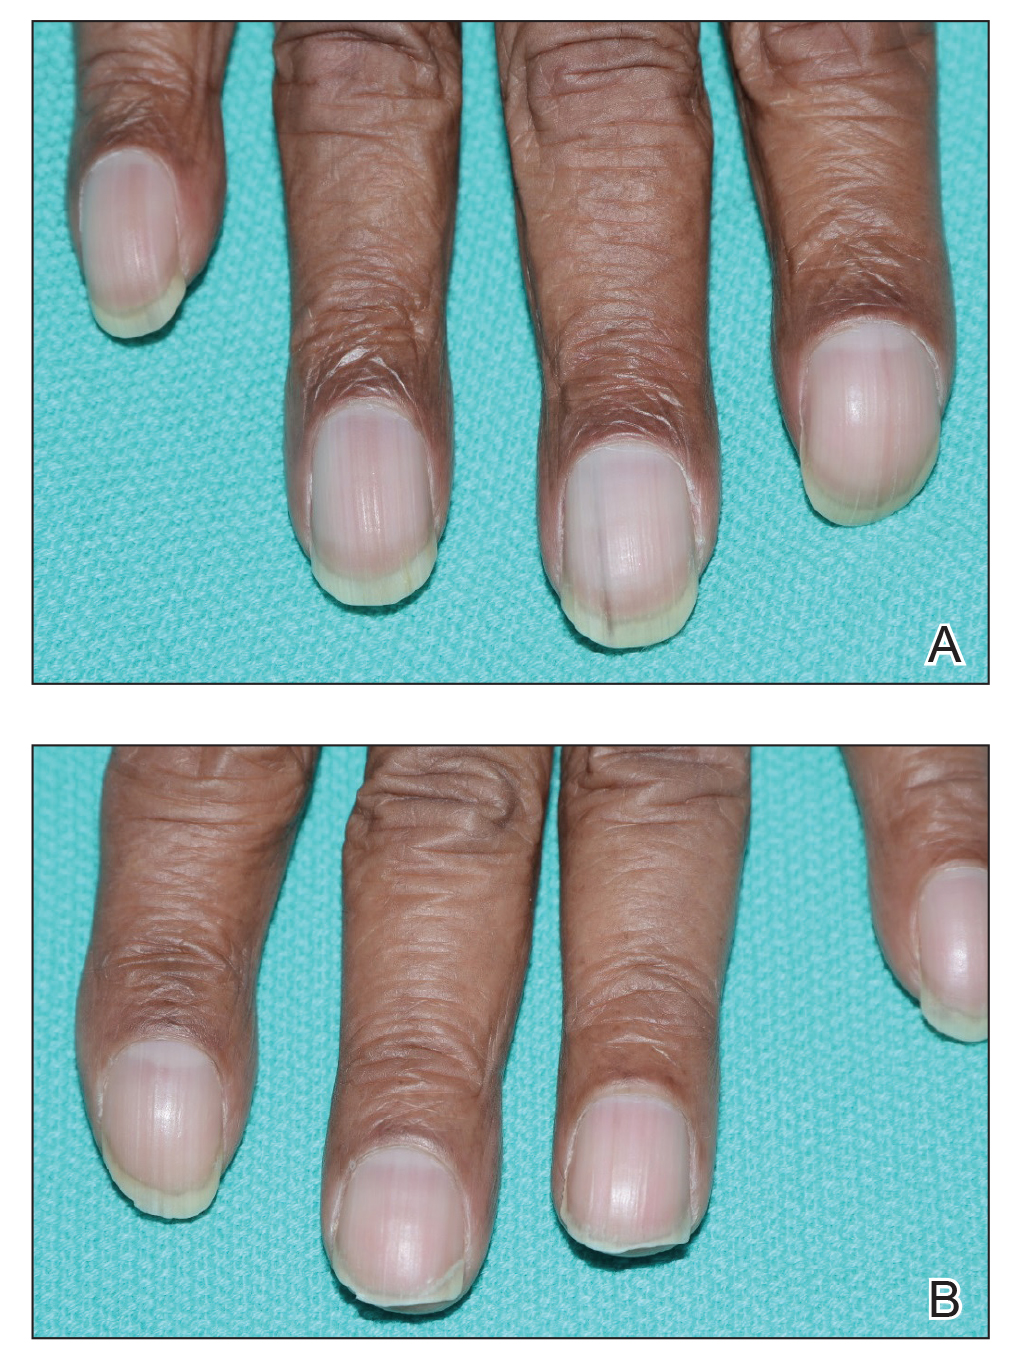 Unilateral Nail Clubbing in a Hemiparetic Patient | MDedge Dermatology